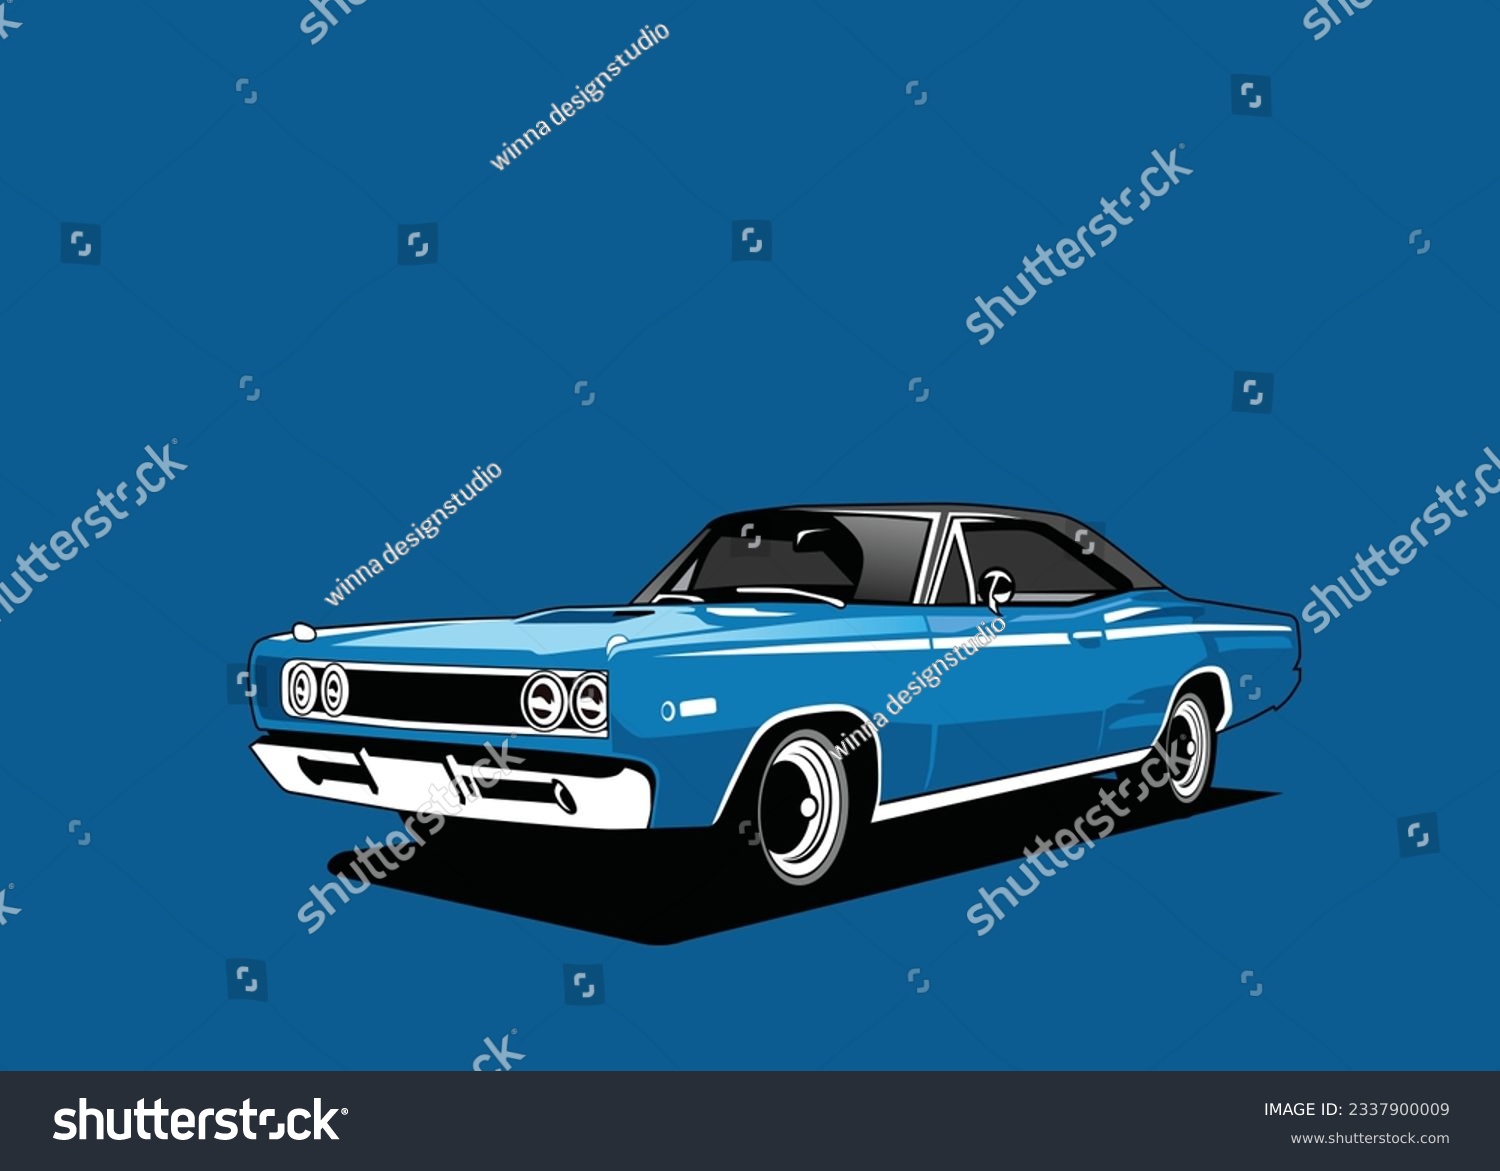 SVG of Classic car home page image illustration vector svg